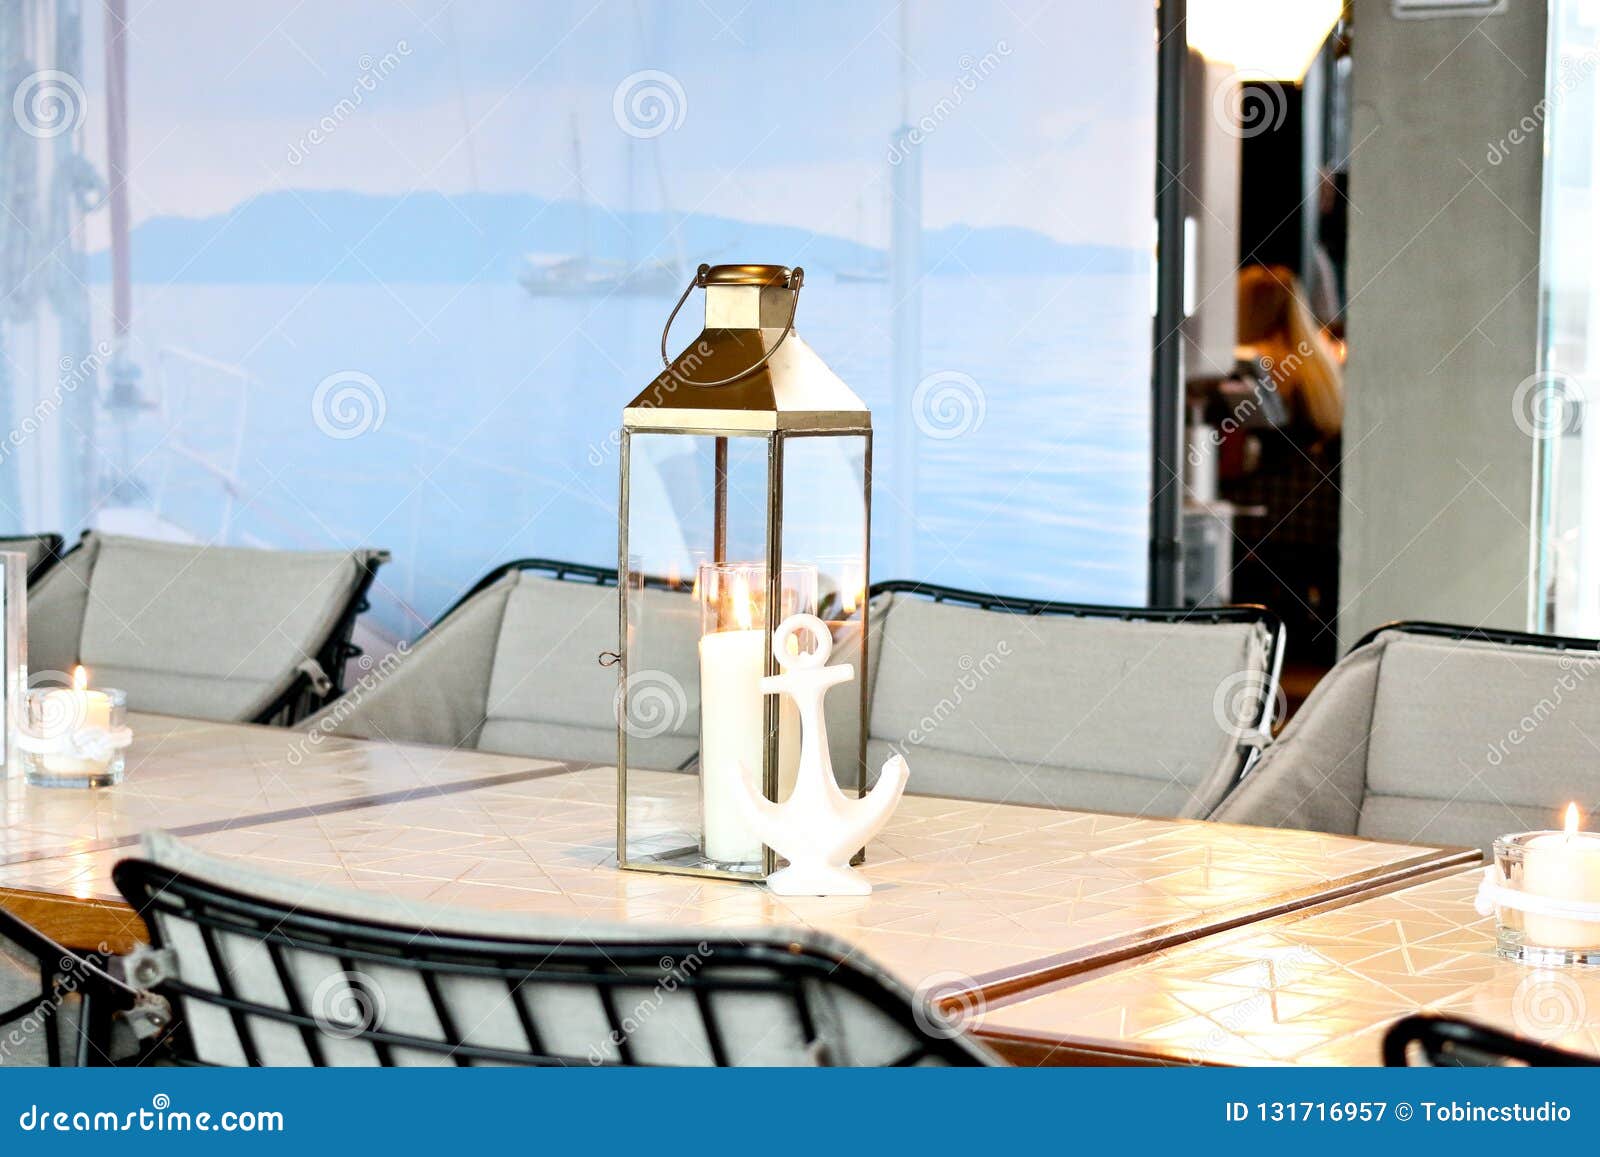 Classic Candle Light Lantern On Dining Table Stock Image